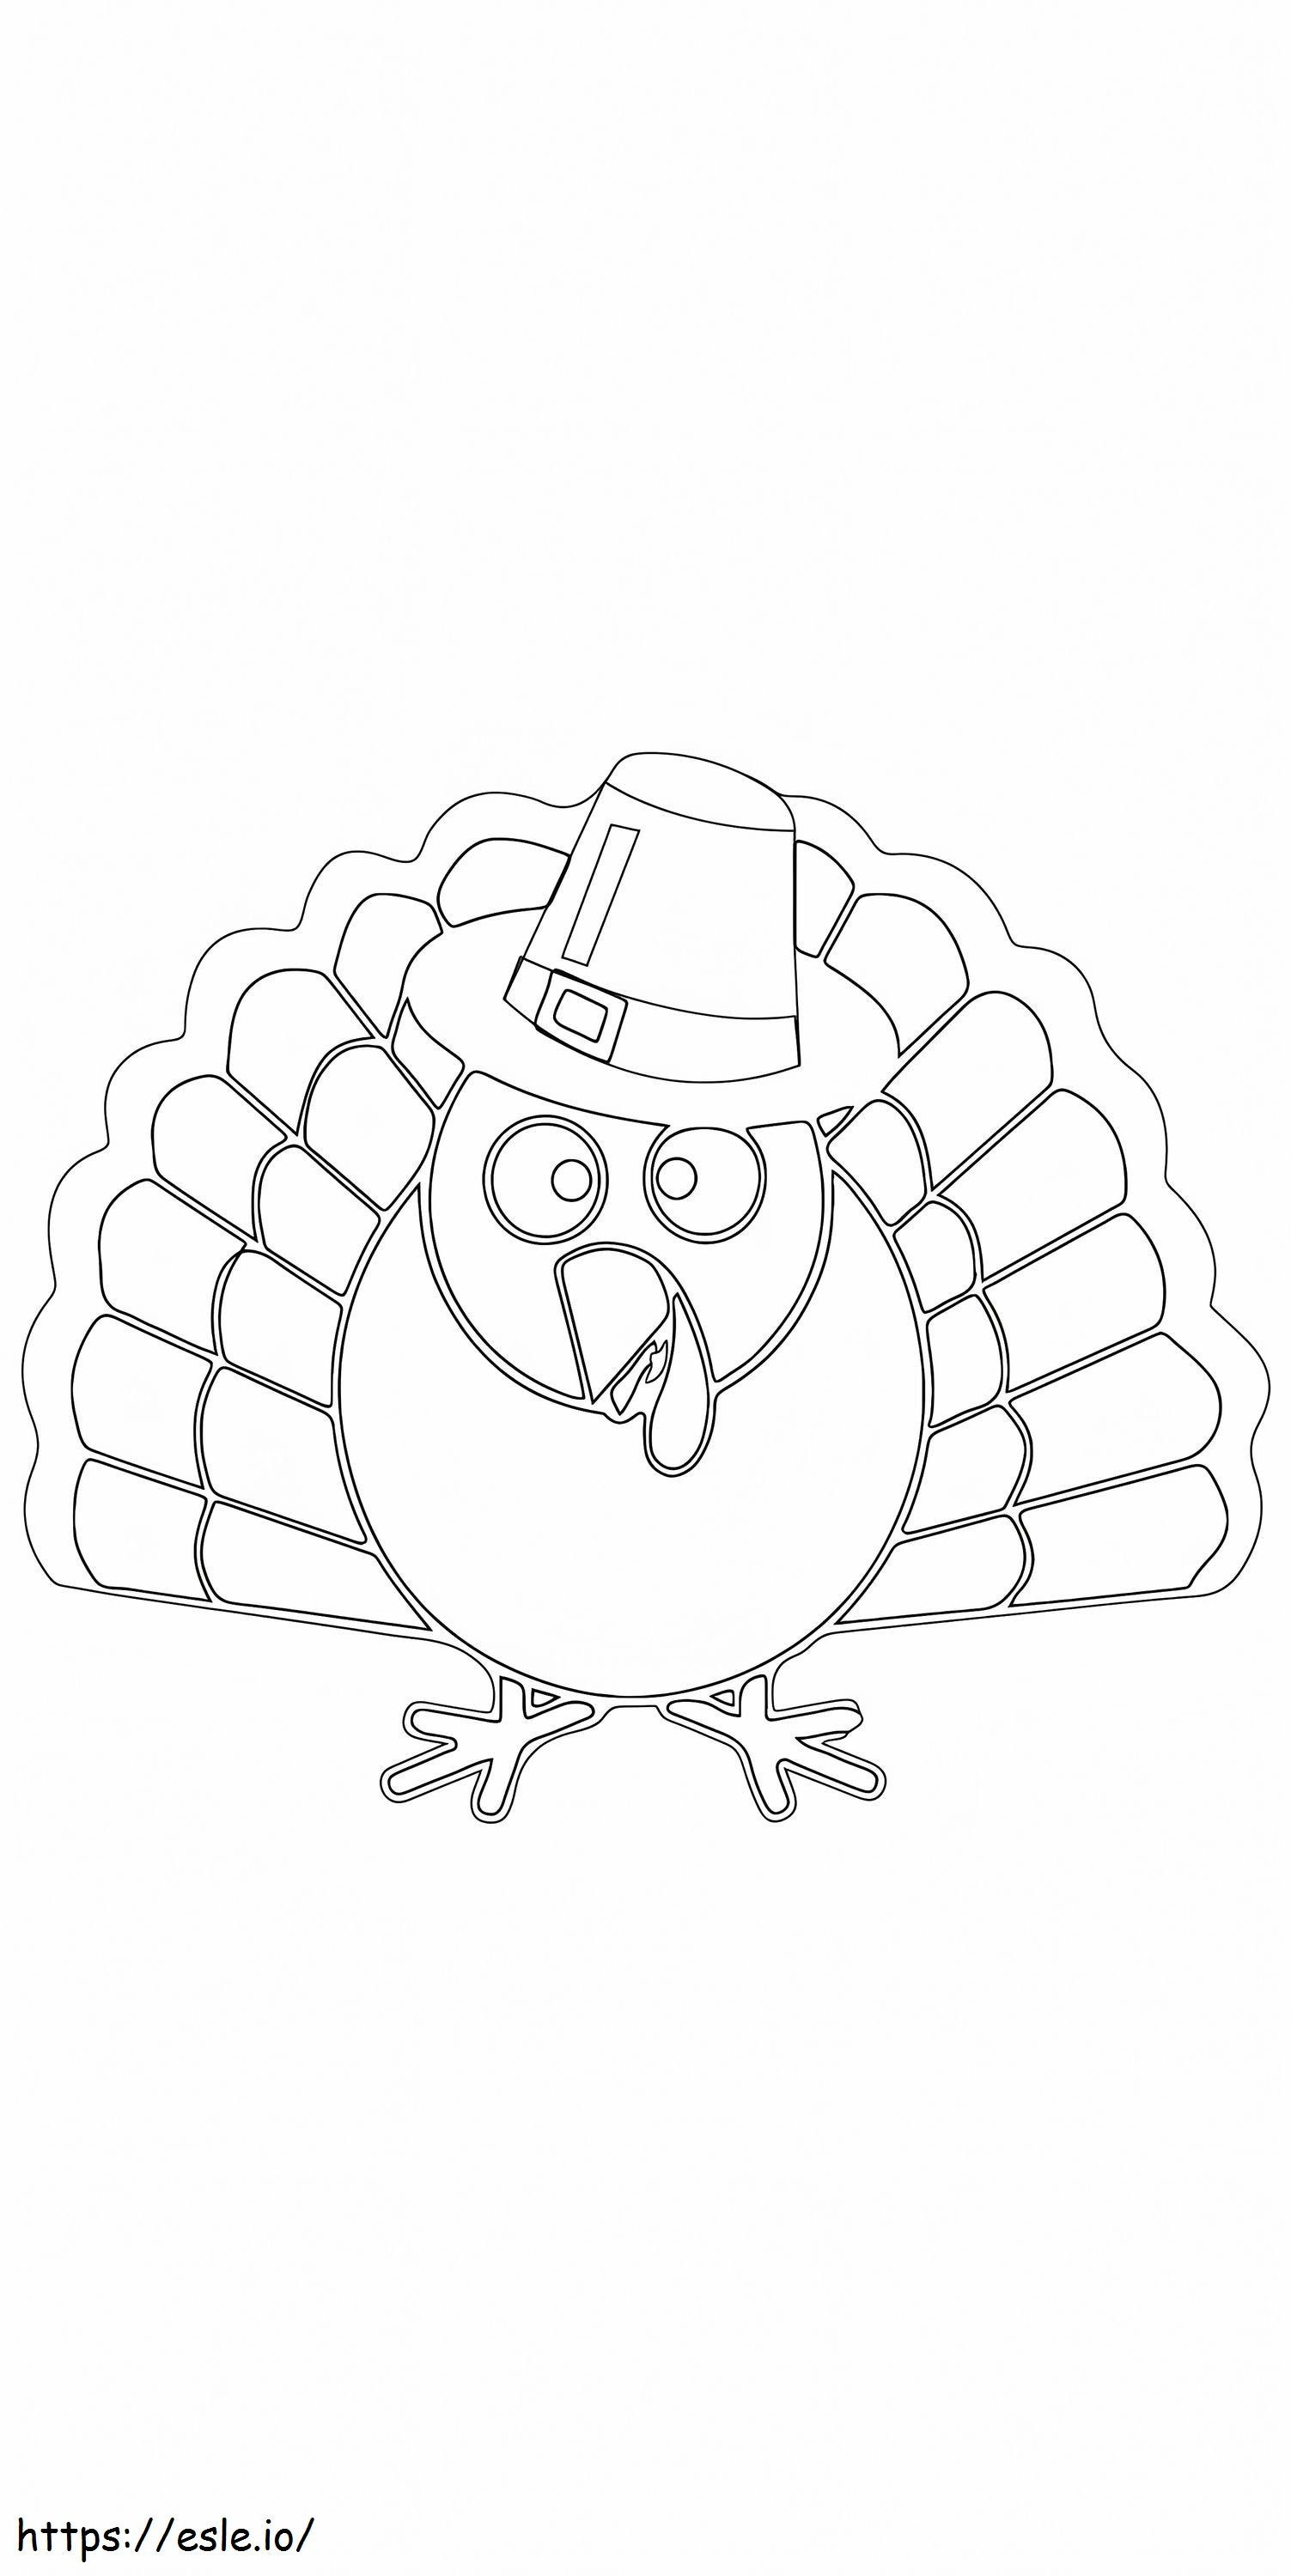 Turkey In Pilgrim Hat coloring page